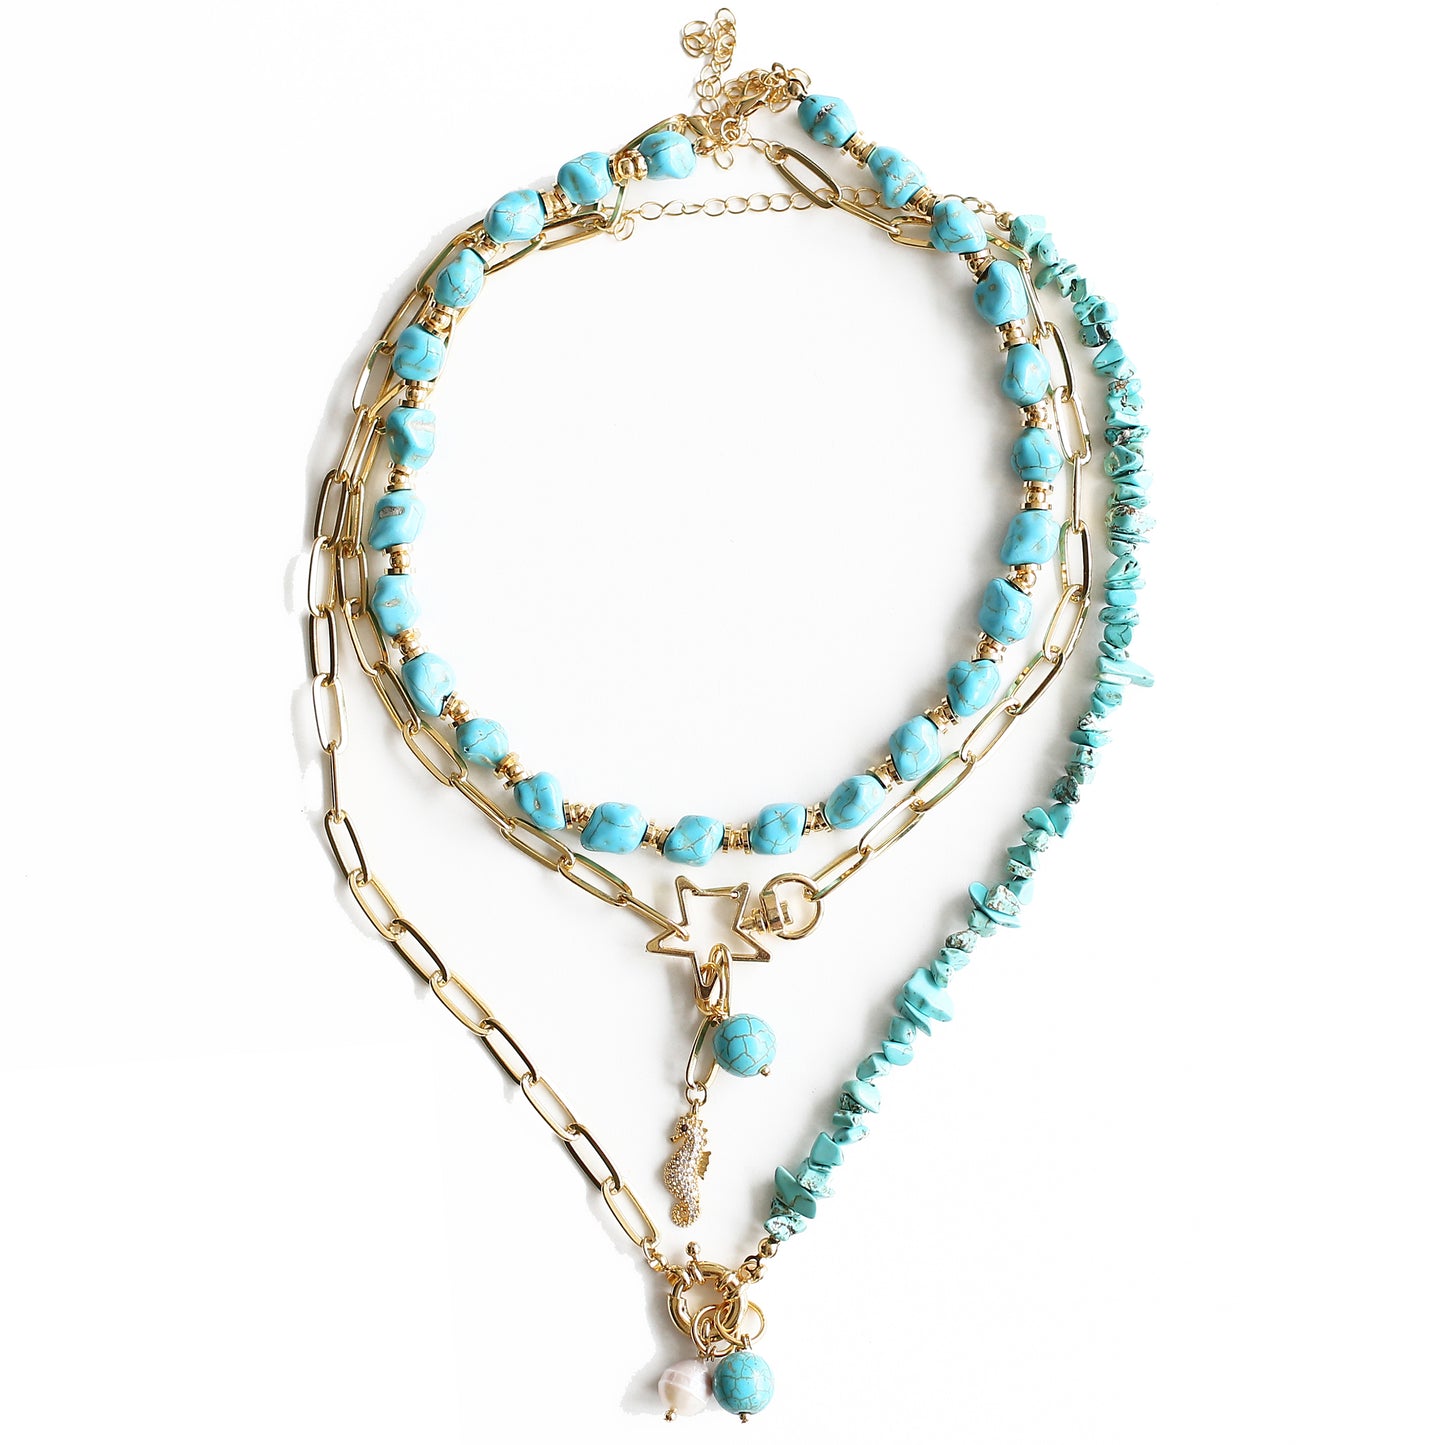 Women Gold-Plated Boho Layered Necklace Set 3Pcs, Turquoise Stone, Link Chain with Seahorse & Stone Pendant, Half Chain & Turquoise with Beads, Bohemian Style Trendy & Adjustable Fashion Jewelry